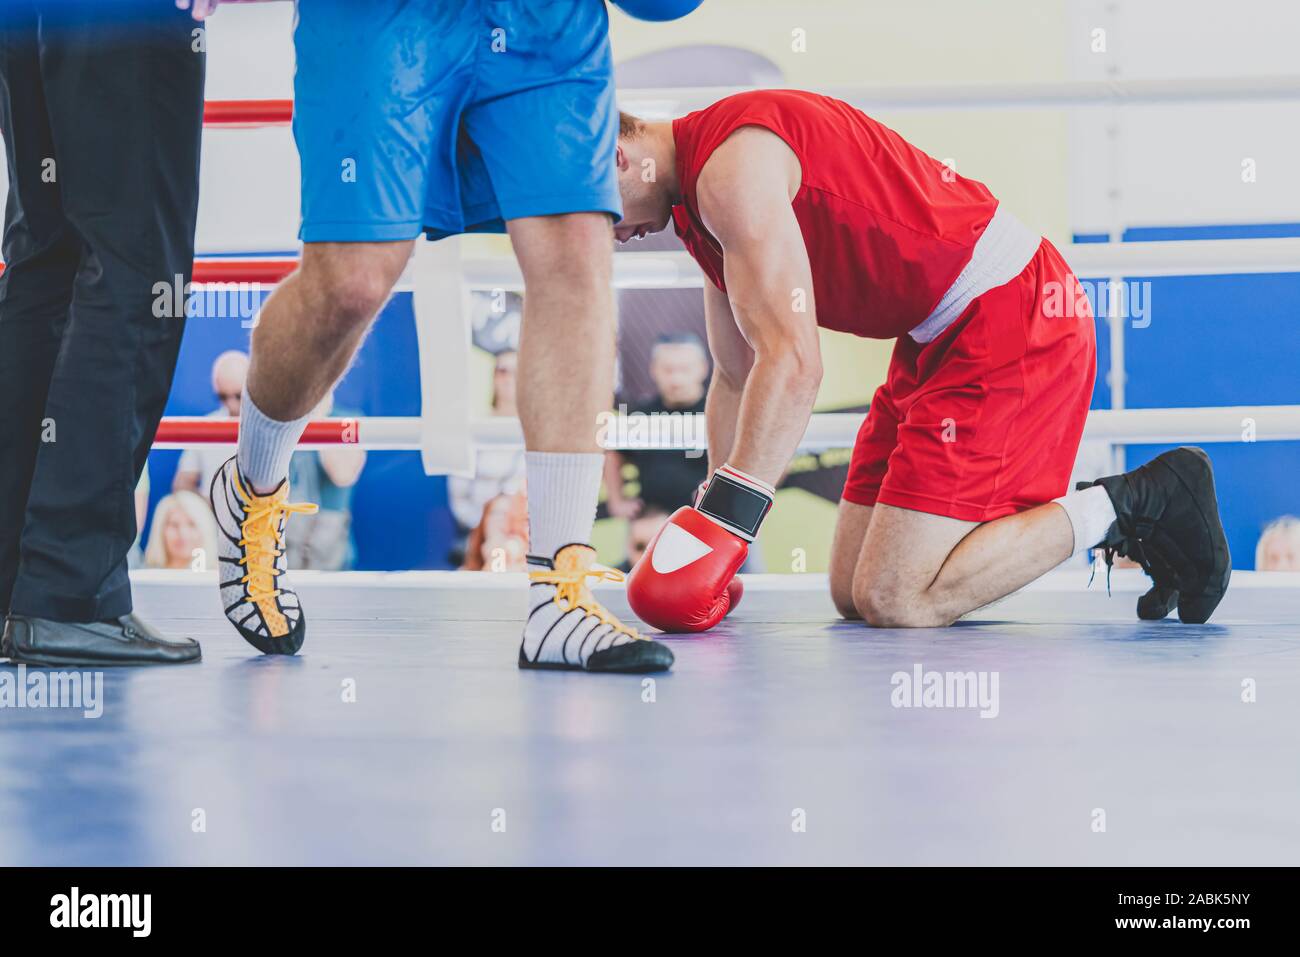 Two boxers in the boxing ring. Knockout and taste defeat. Boxer kneeling with his head bowed. Horizontal image. Stock Photo